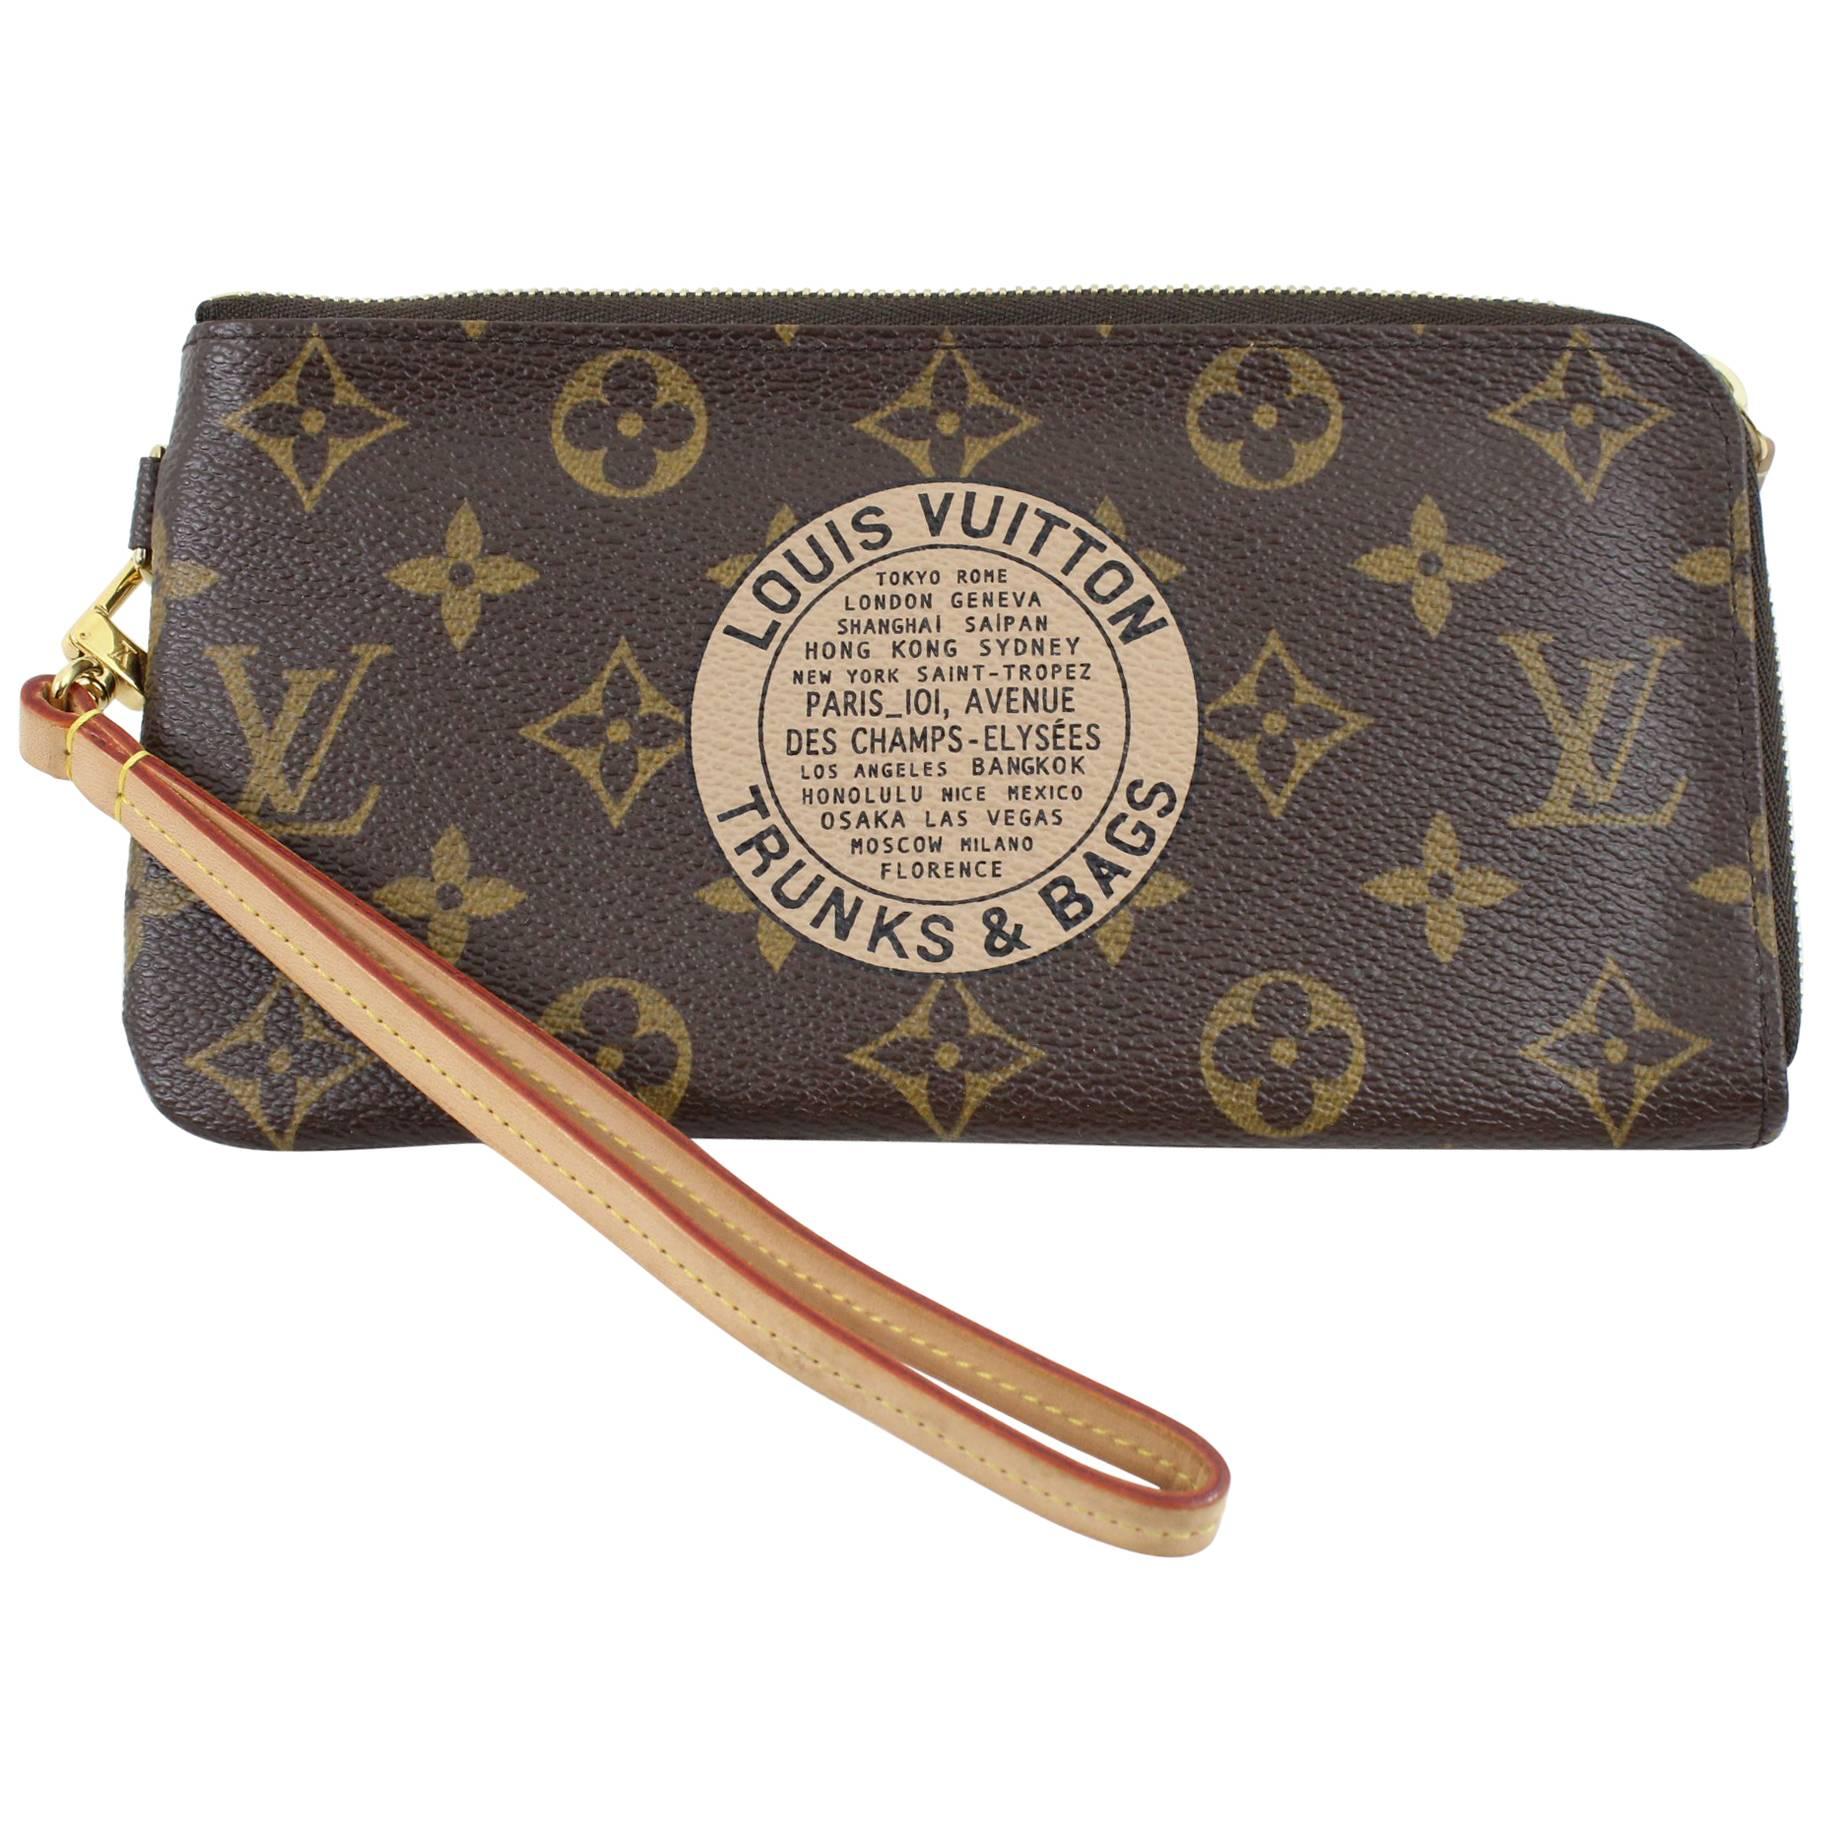 Louis Vuitton Collectible Clutch from the Trunk & Bags Collection For Sale